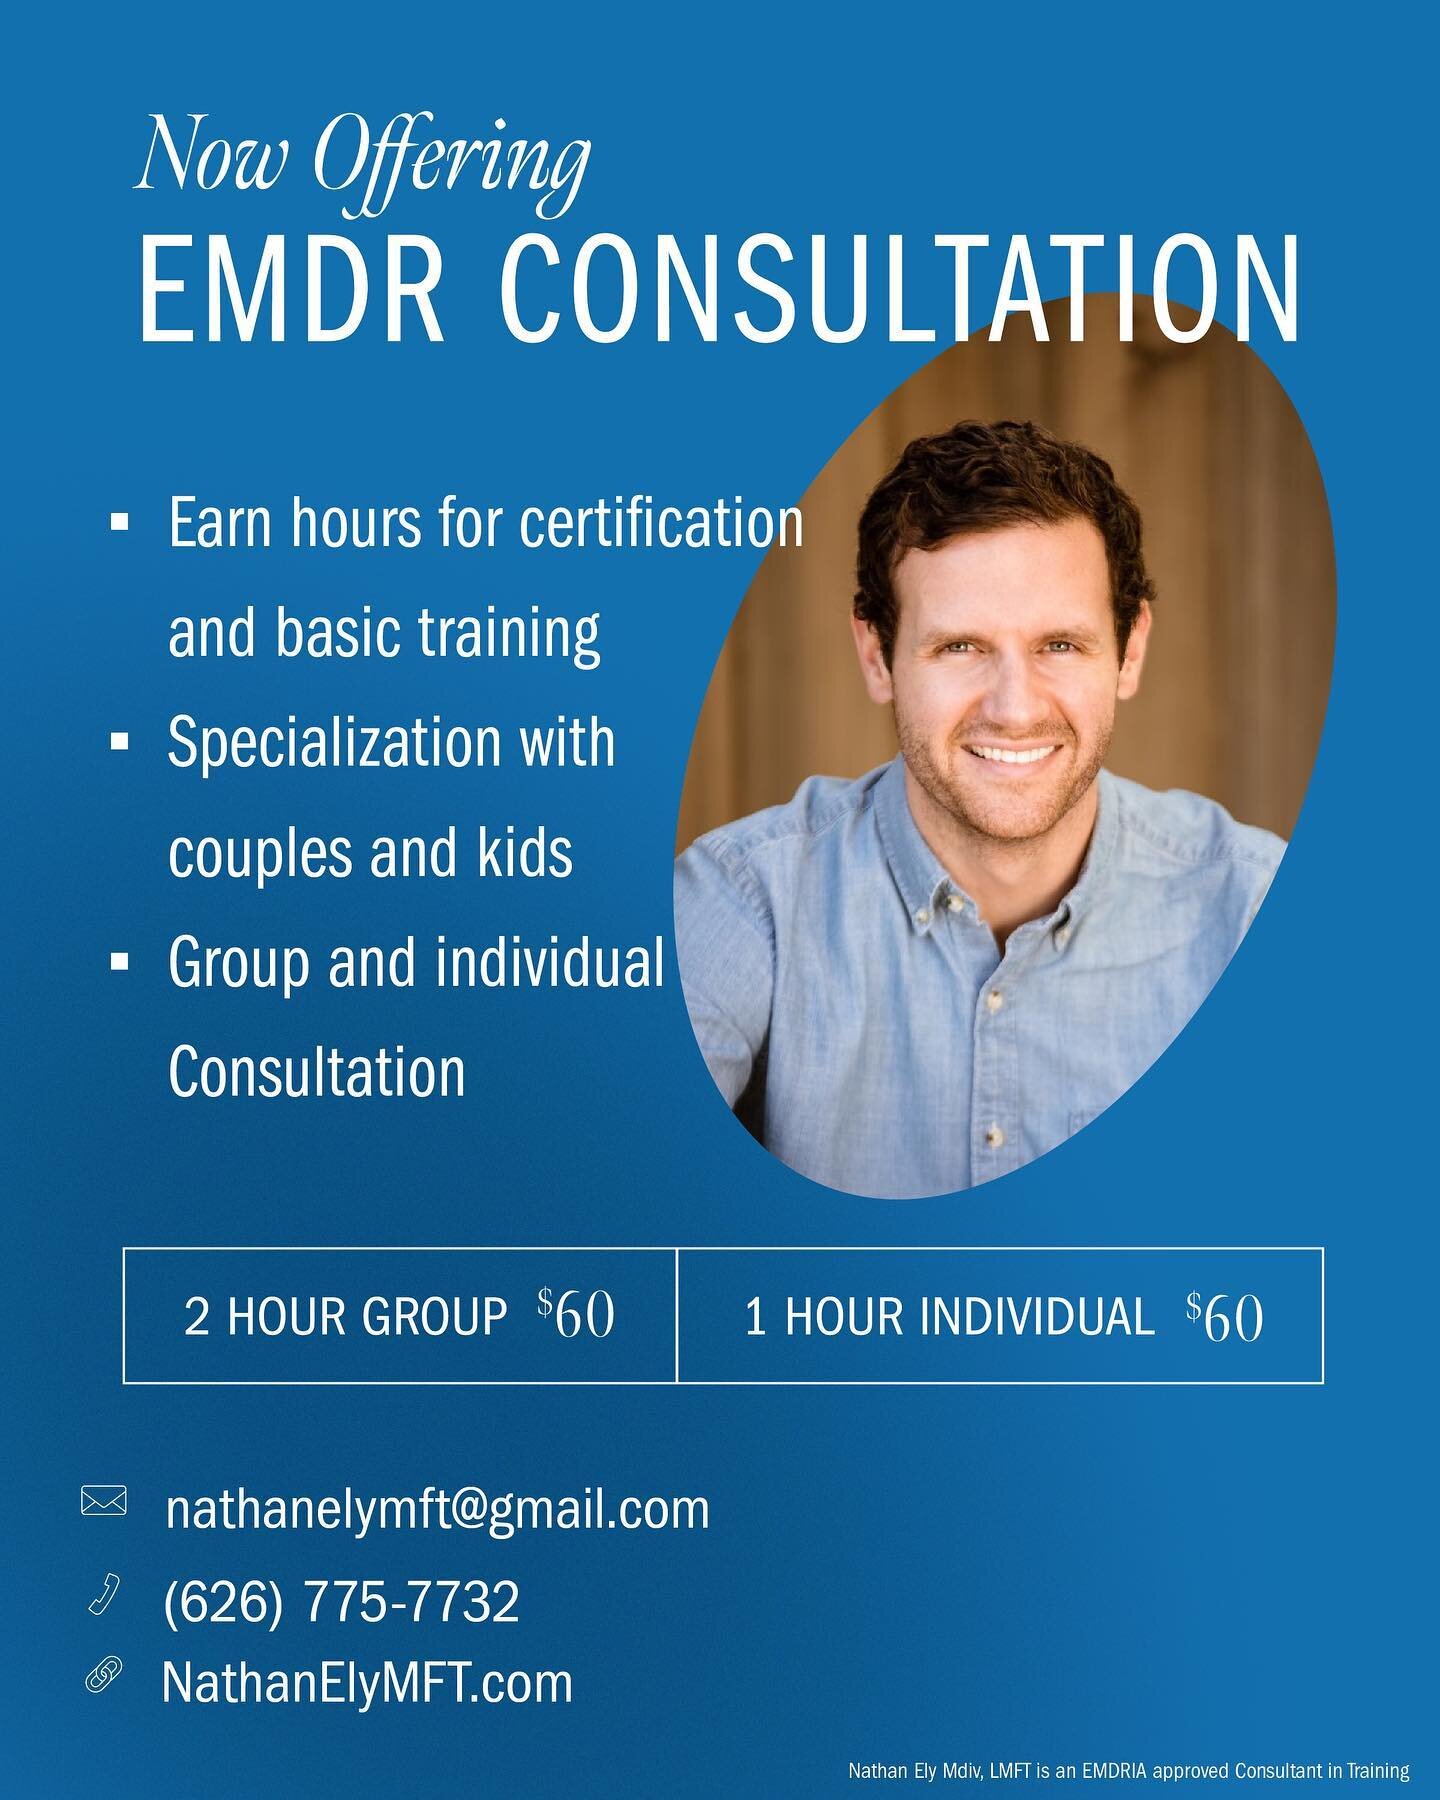 I&rsquo;m available for individual or group EMDR consultation! For those getting certified in EMDR, I can provide up to 15 hours of consultation towards certification.